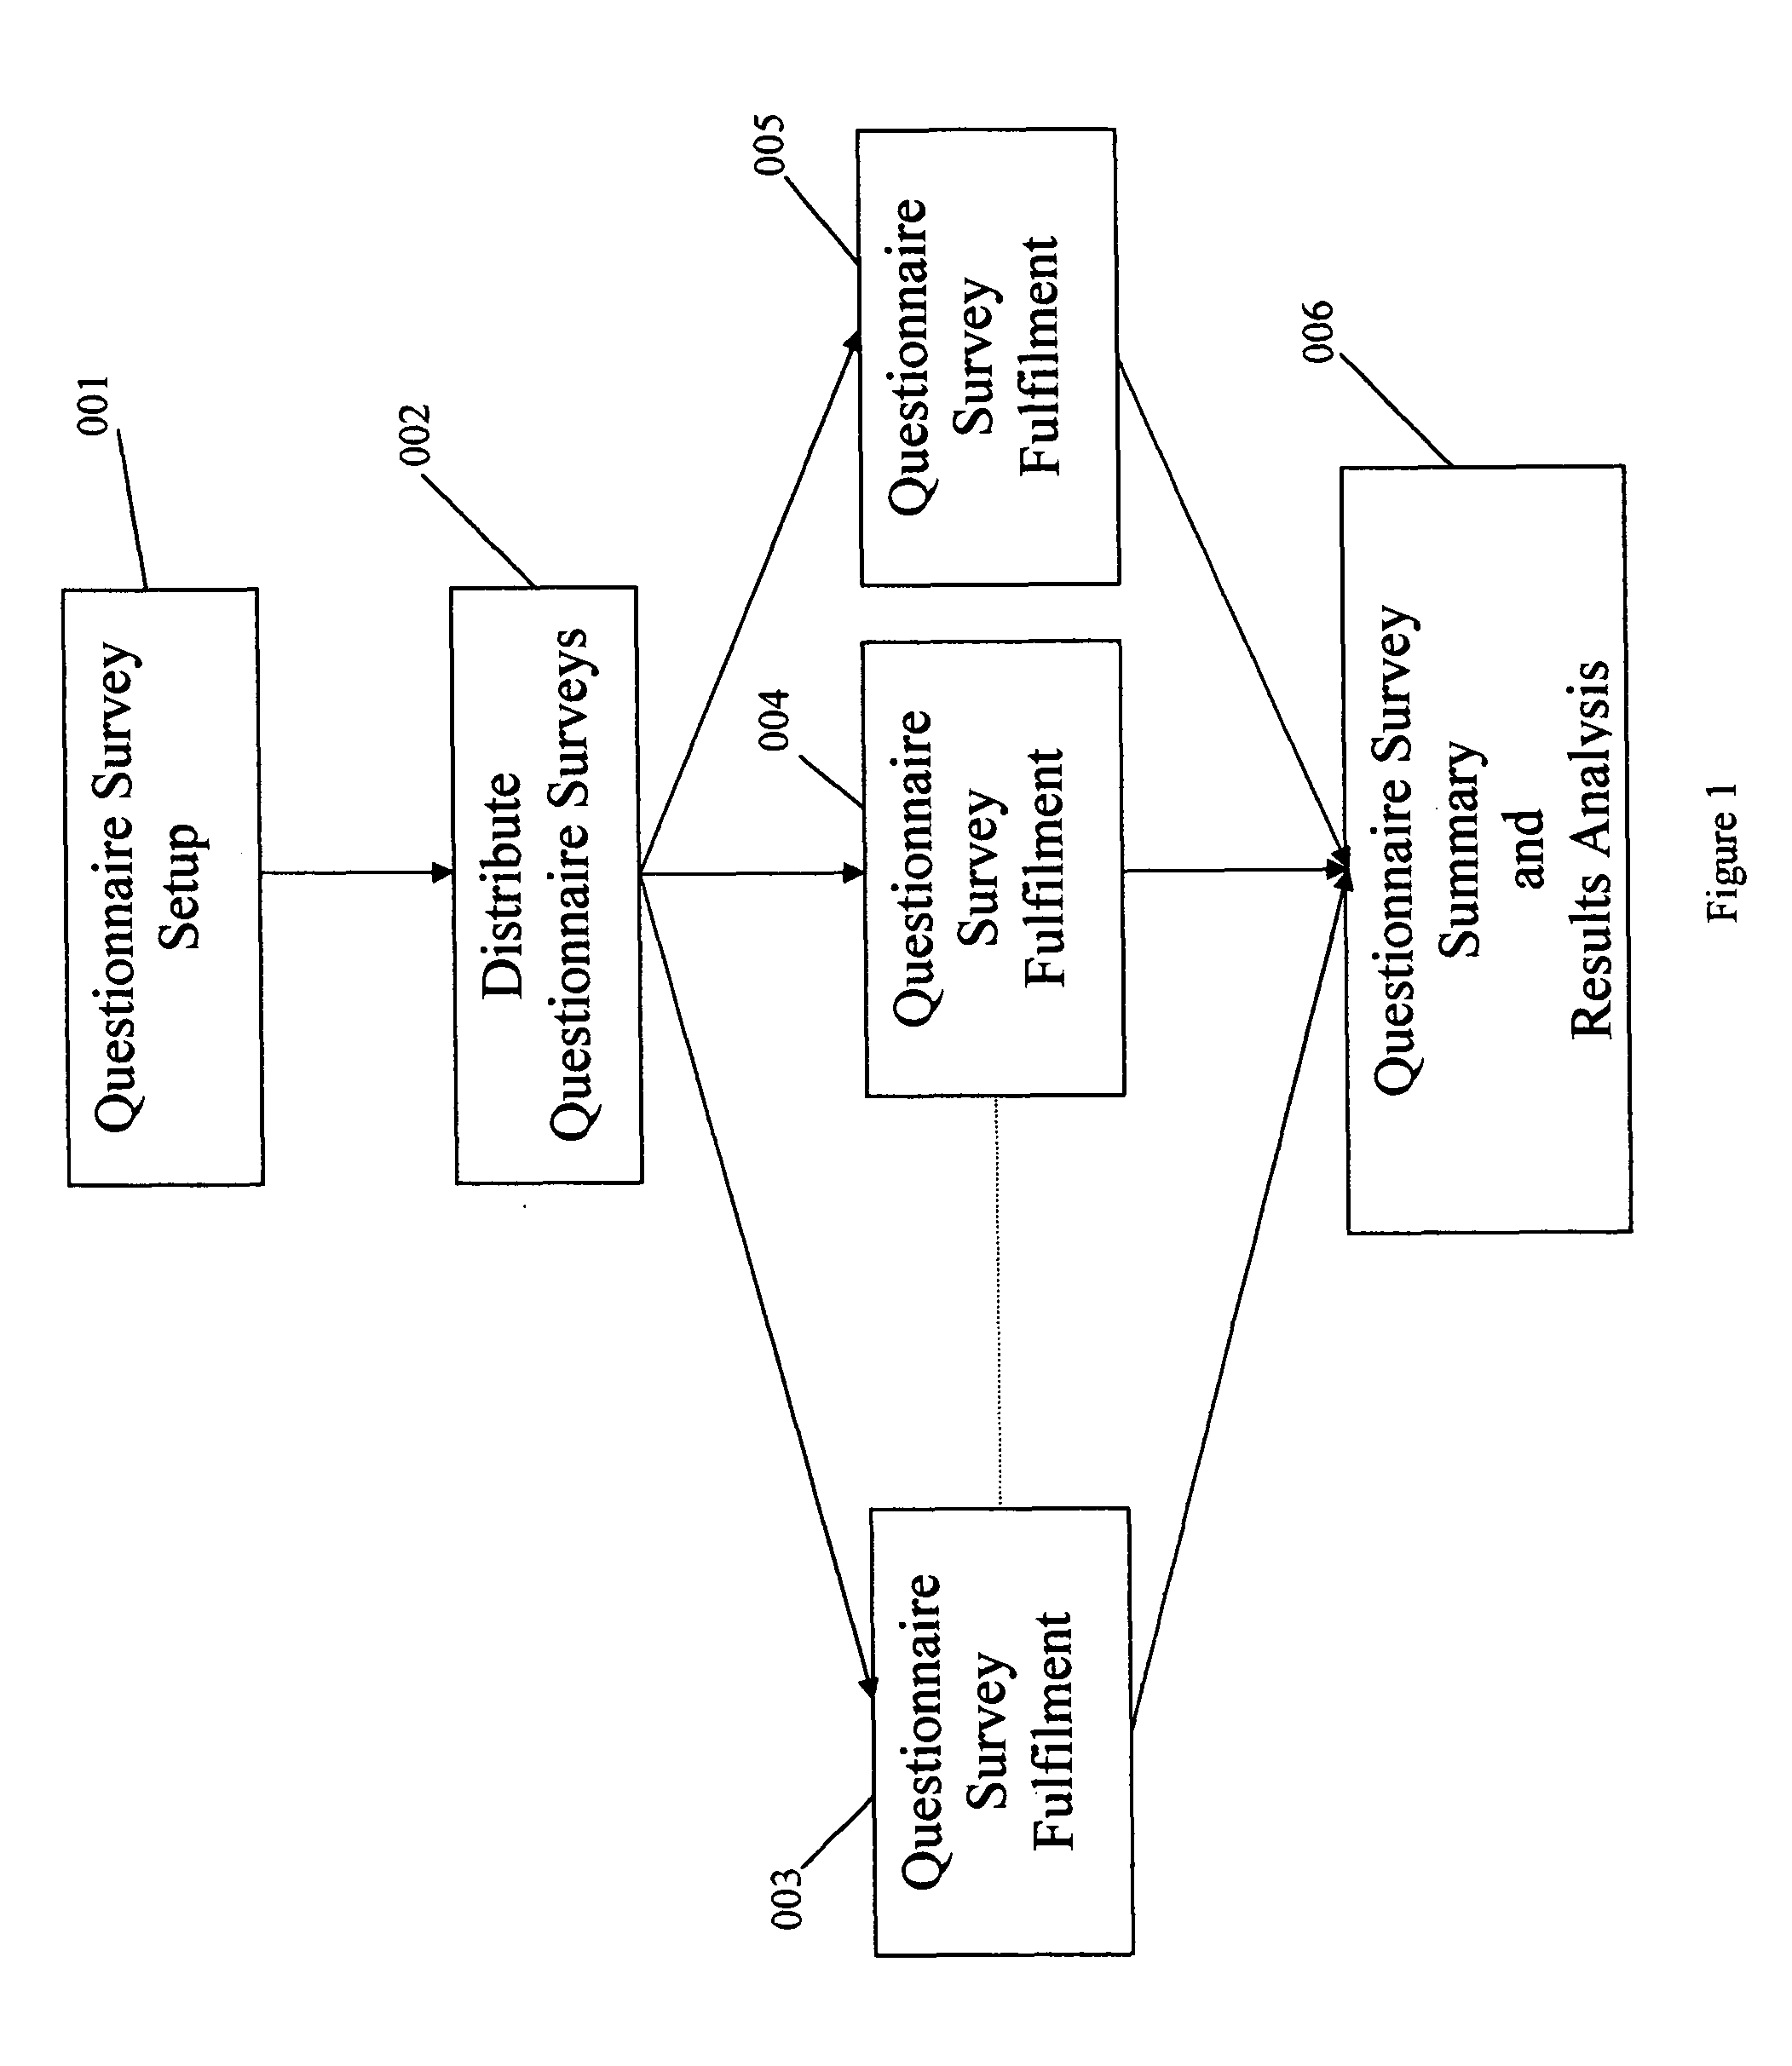 System and method to give a true indication of respondent satisfaction to an electronic questionnaire survey